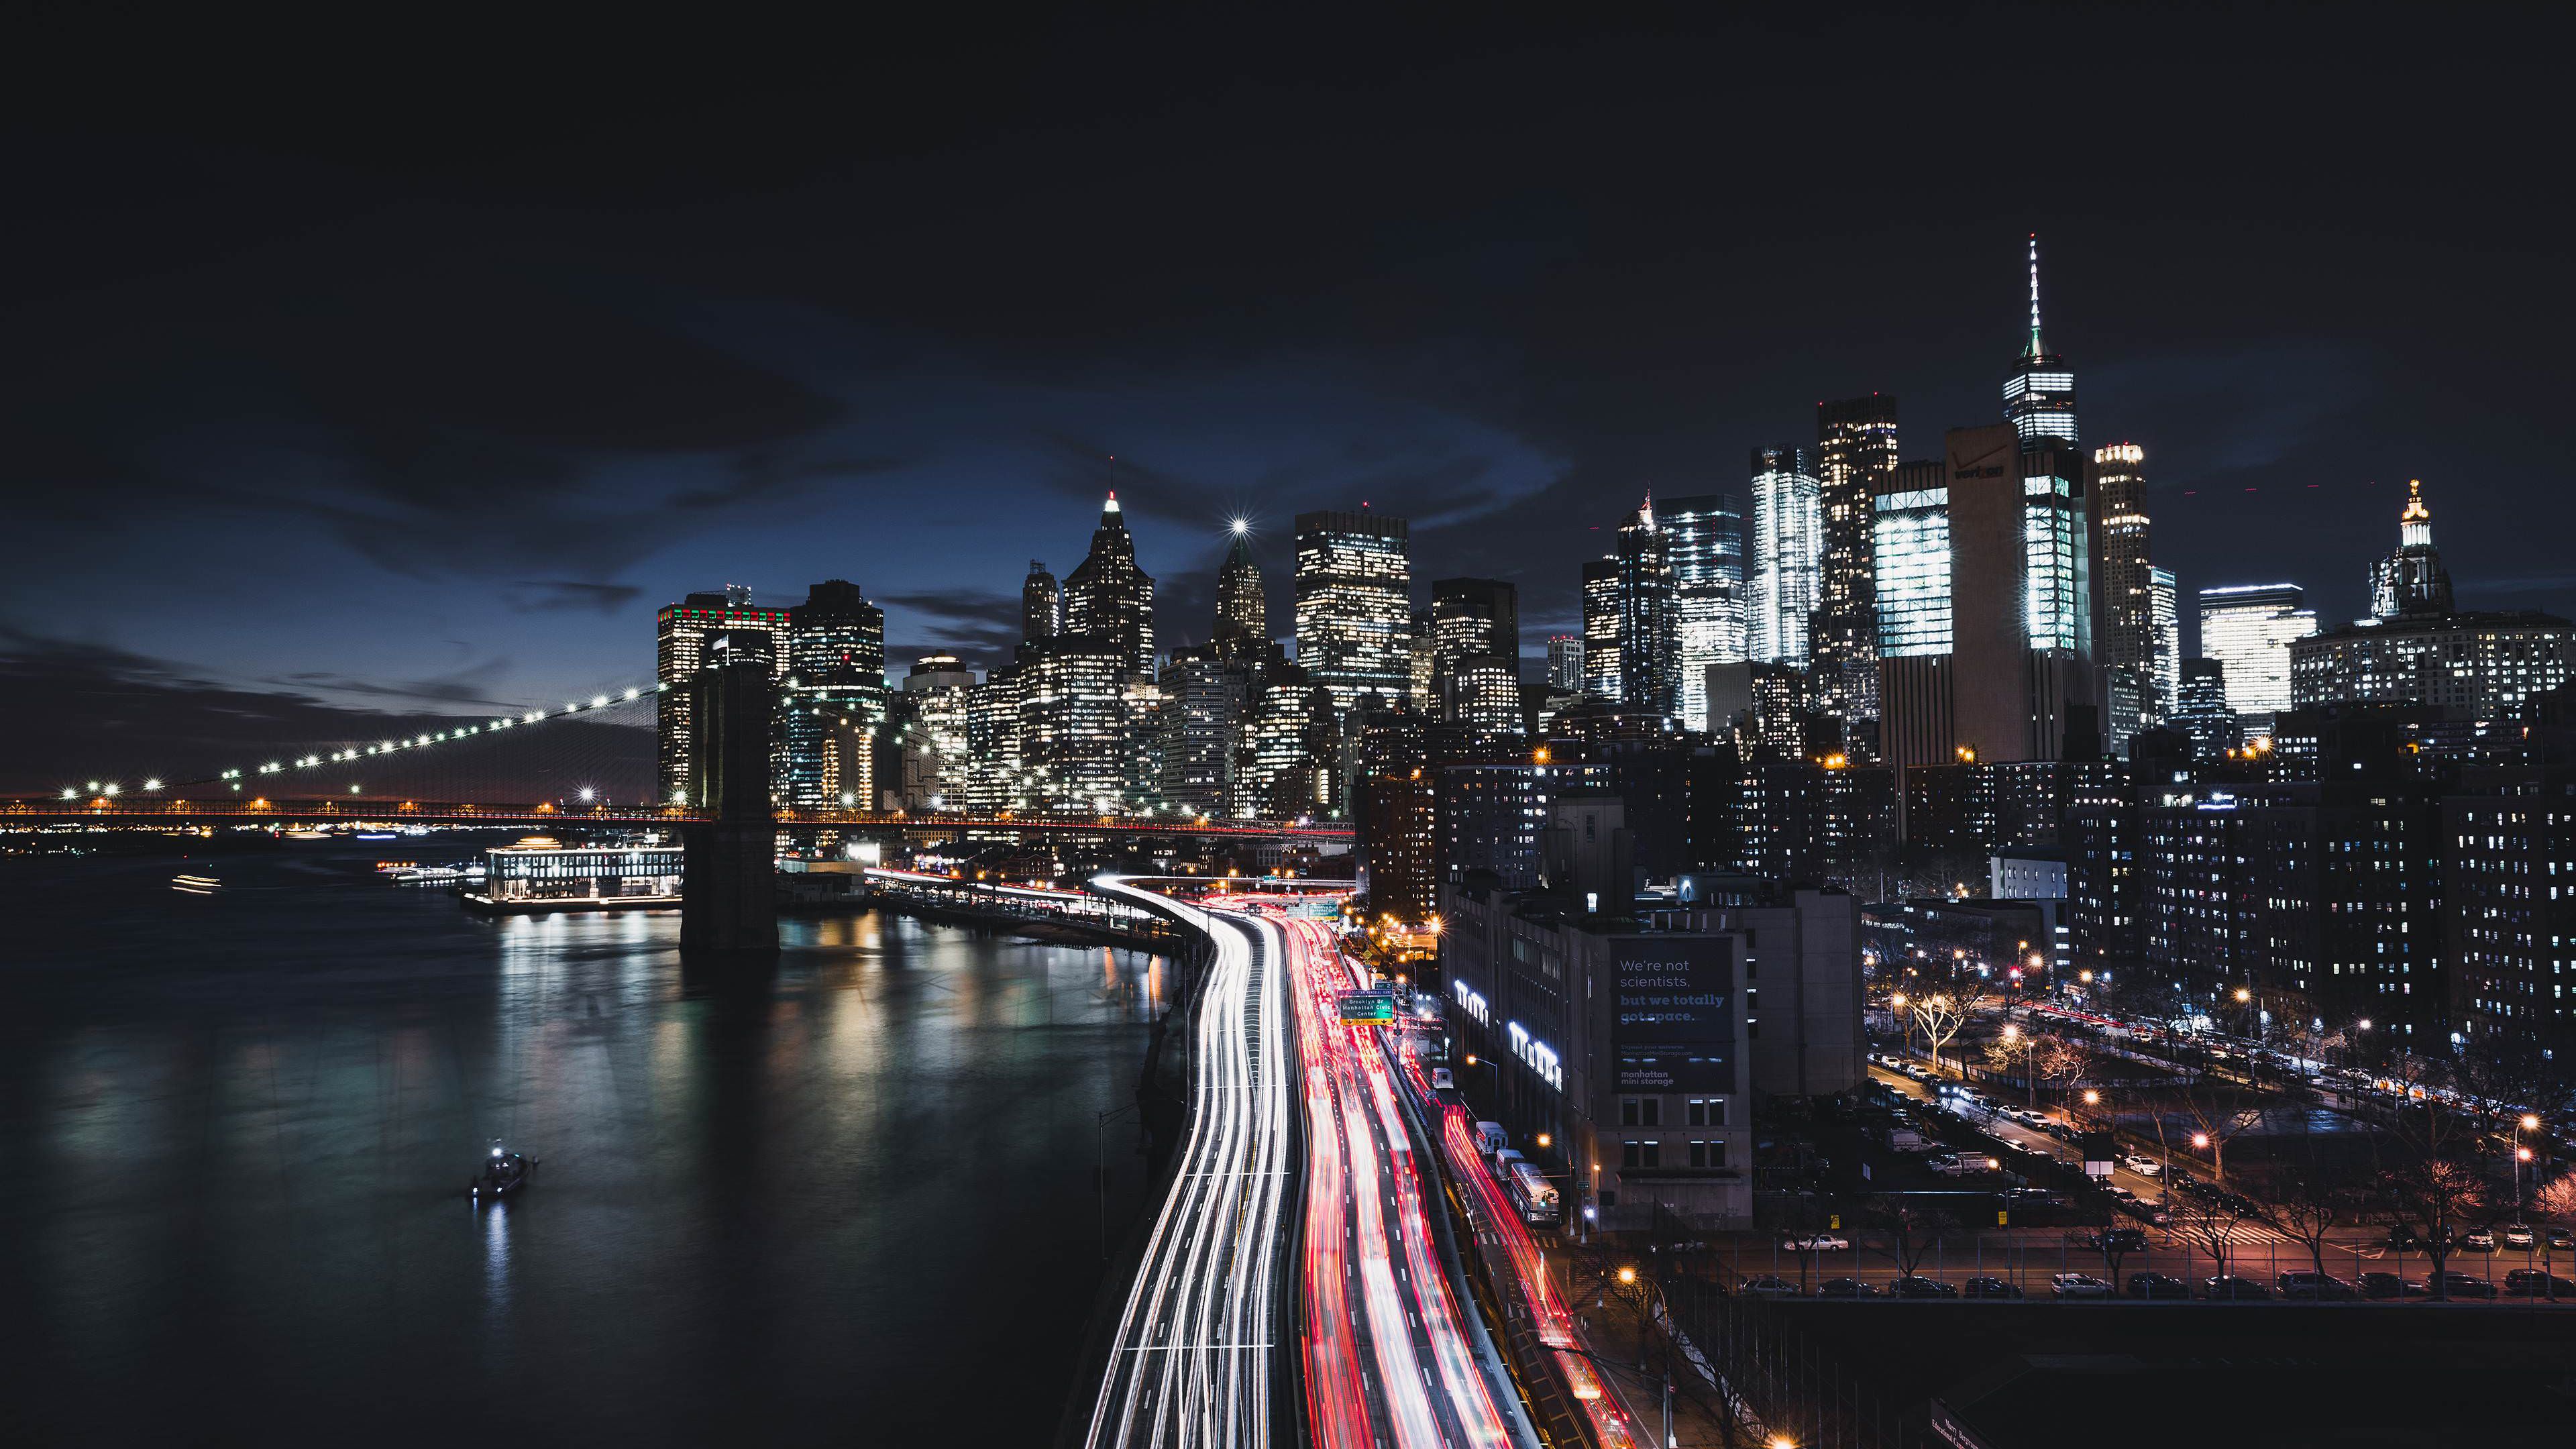 A city skyline at night with a river and bridge in the foreground. - New York